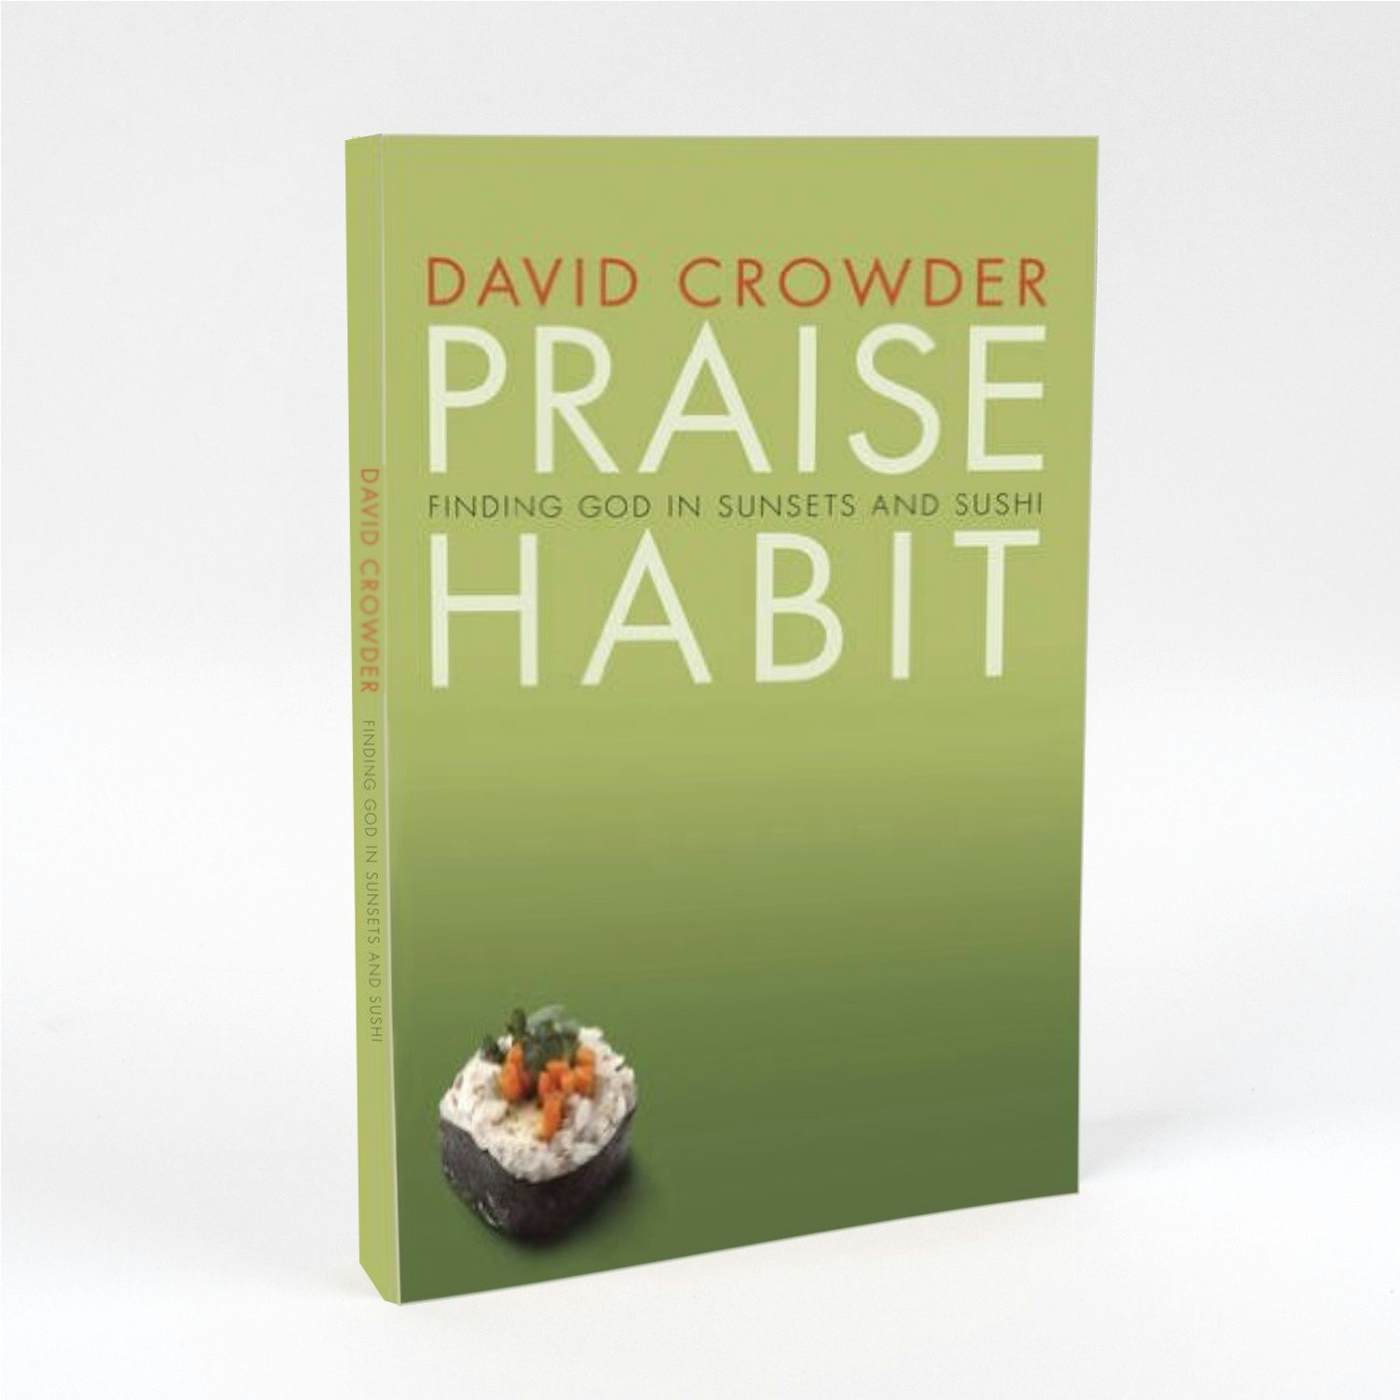 Crowder 'Praise Habit: Finding God in Sunsets and Sushi (Experiencing God)' Book